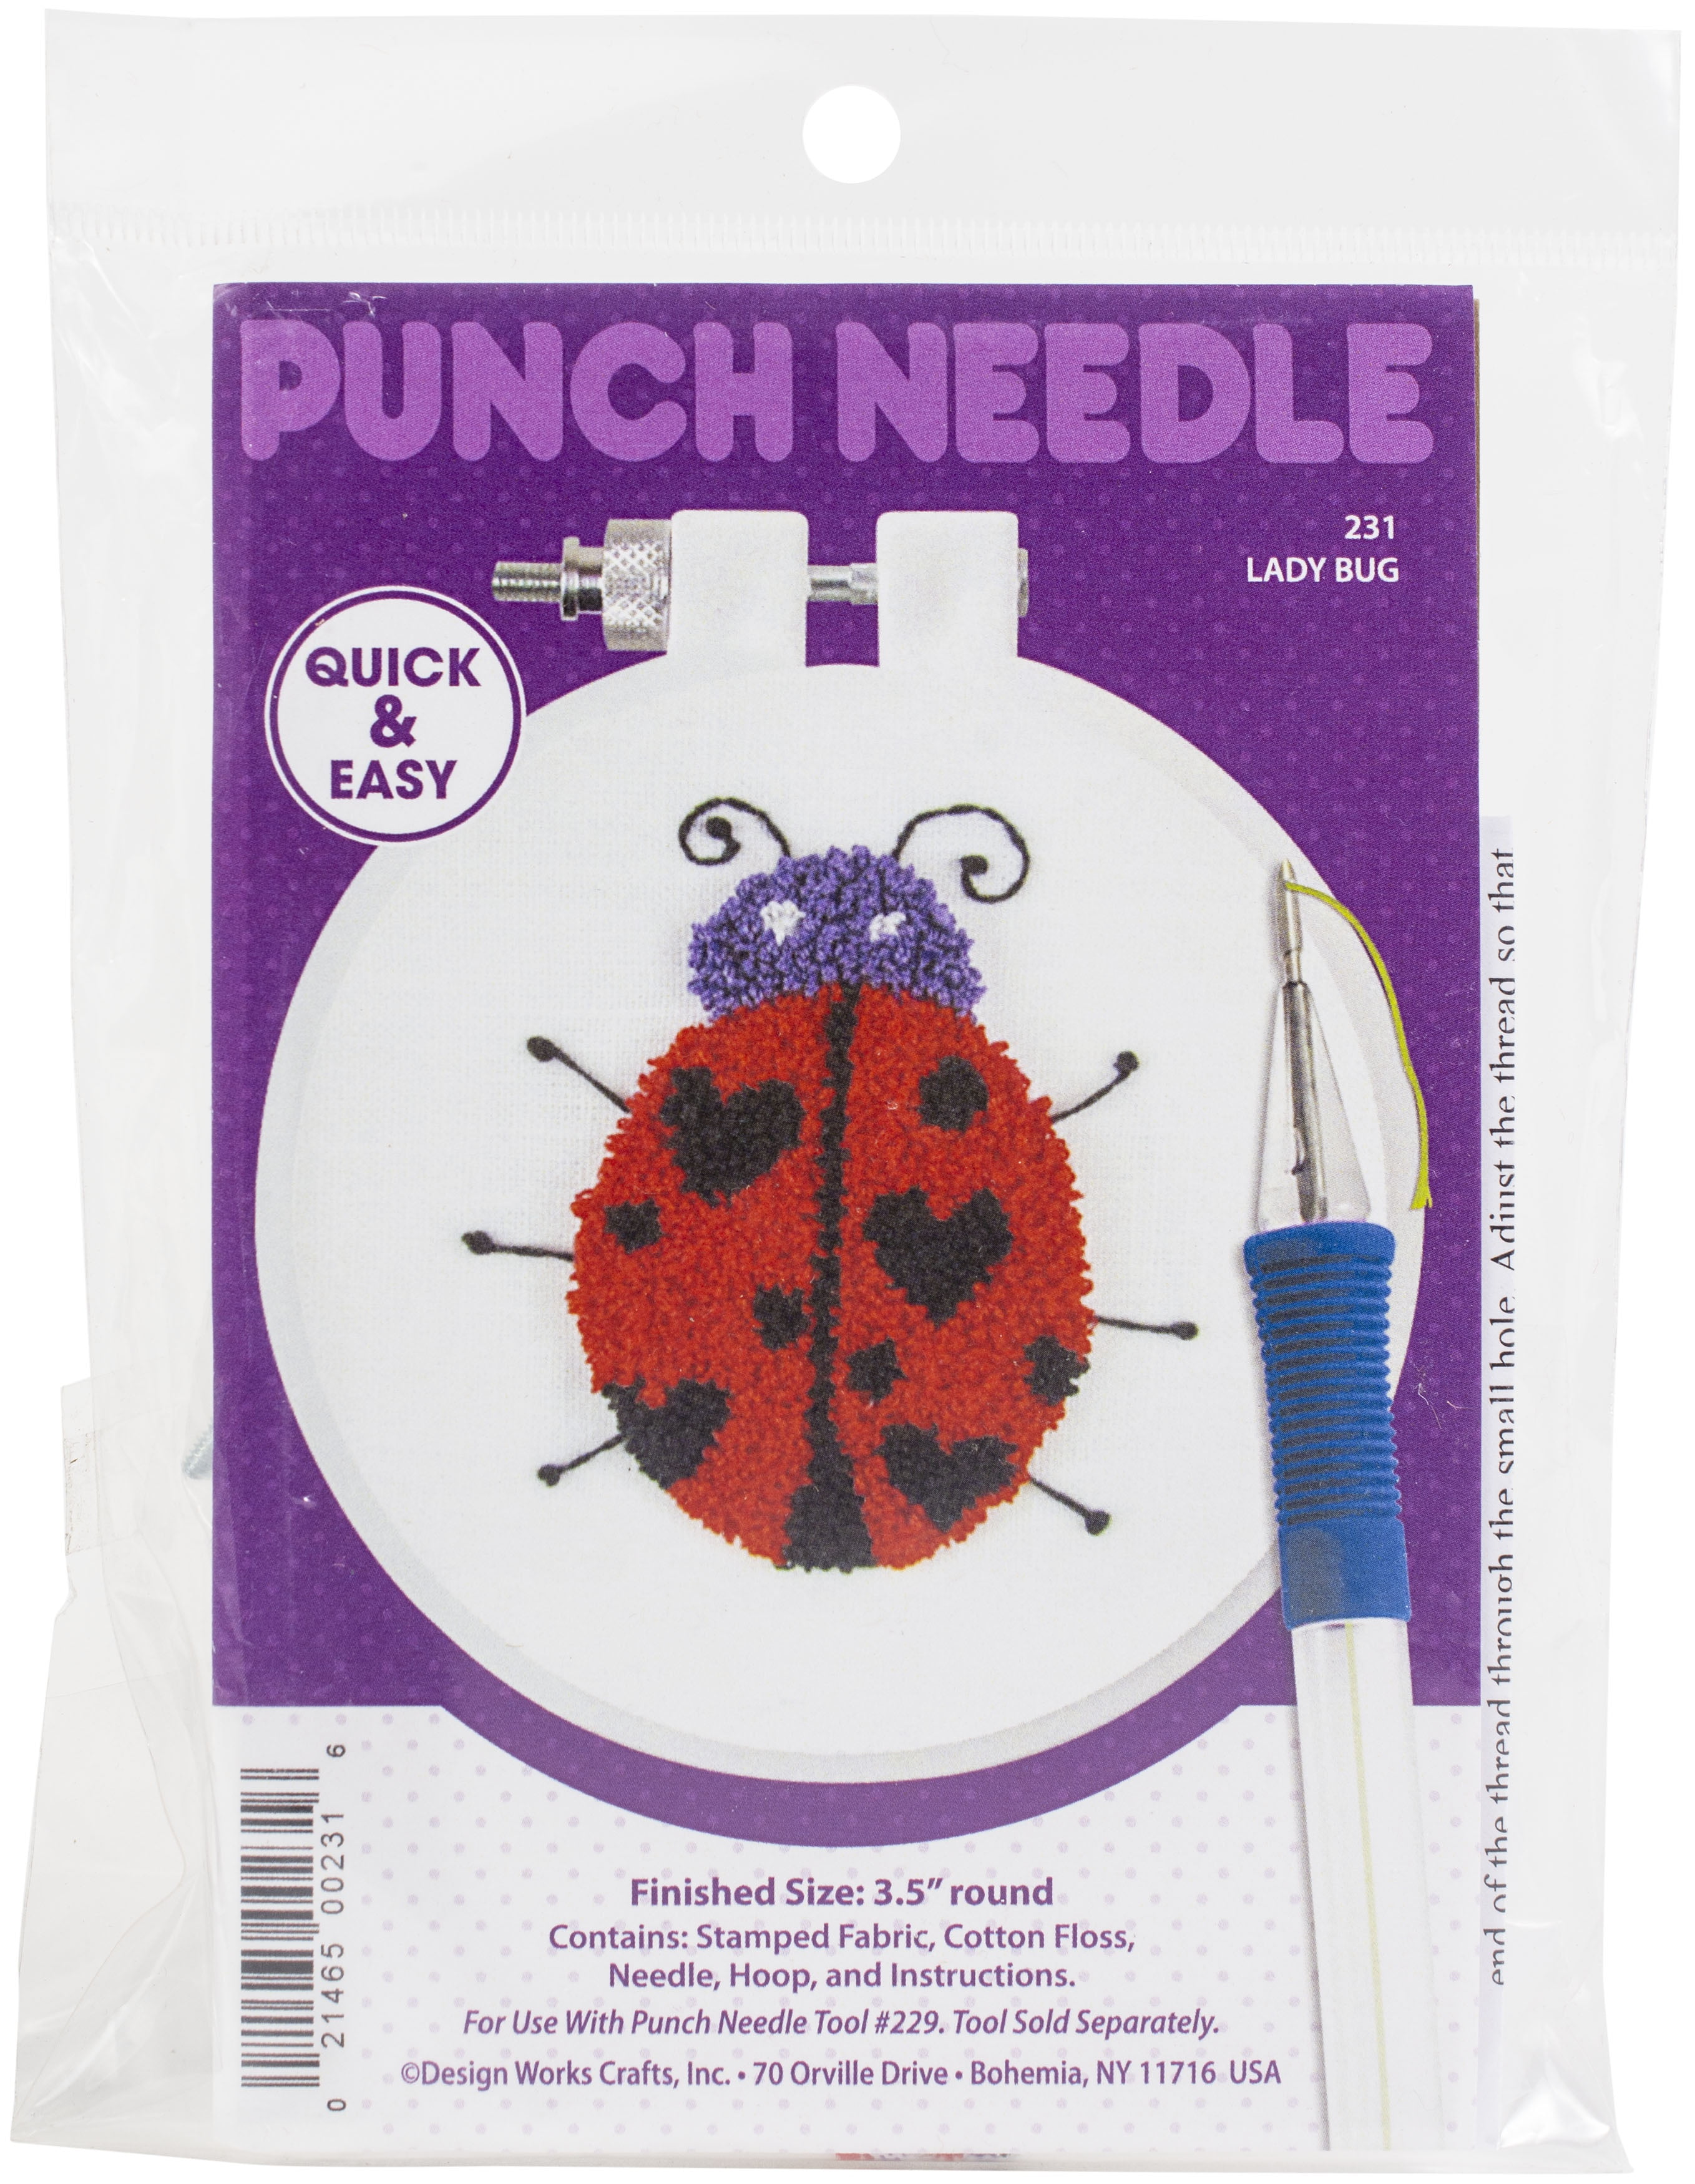 Dimensions Punch Needle Kit 8 Round Modern Floral Pin